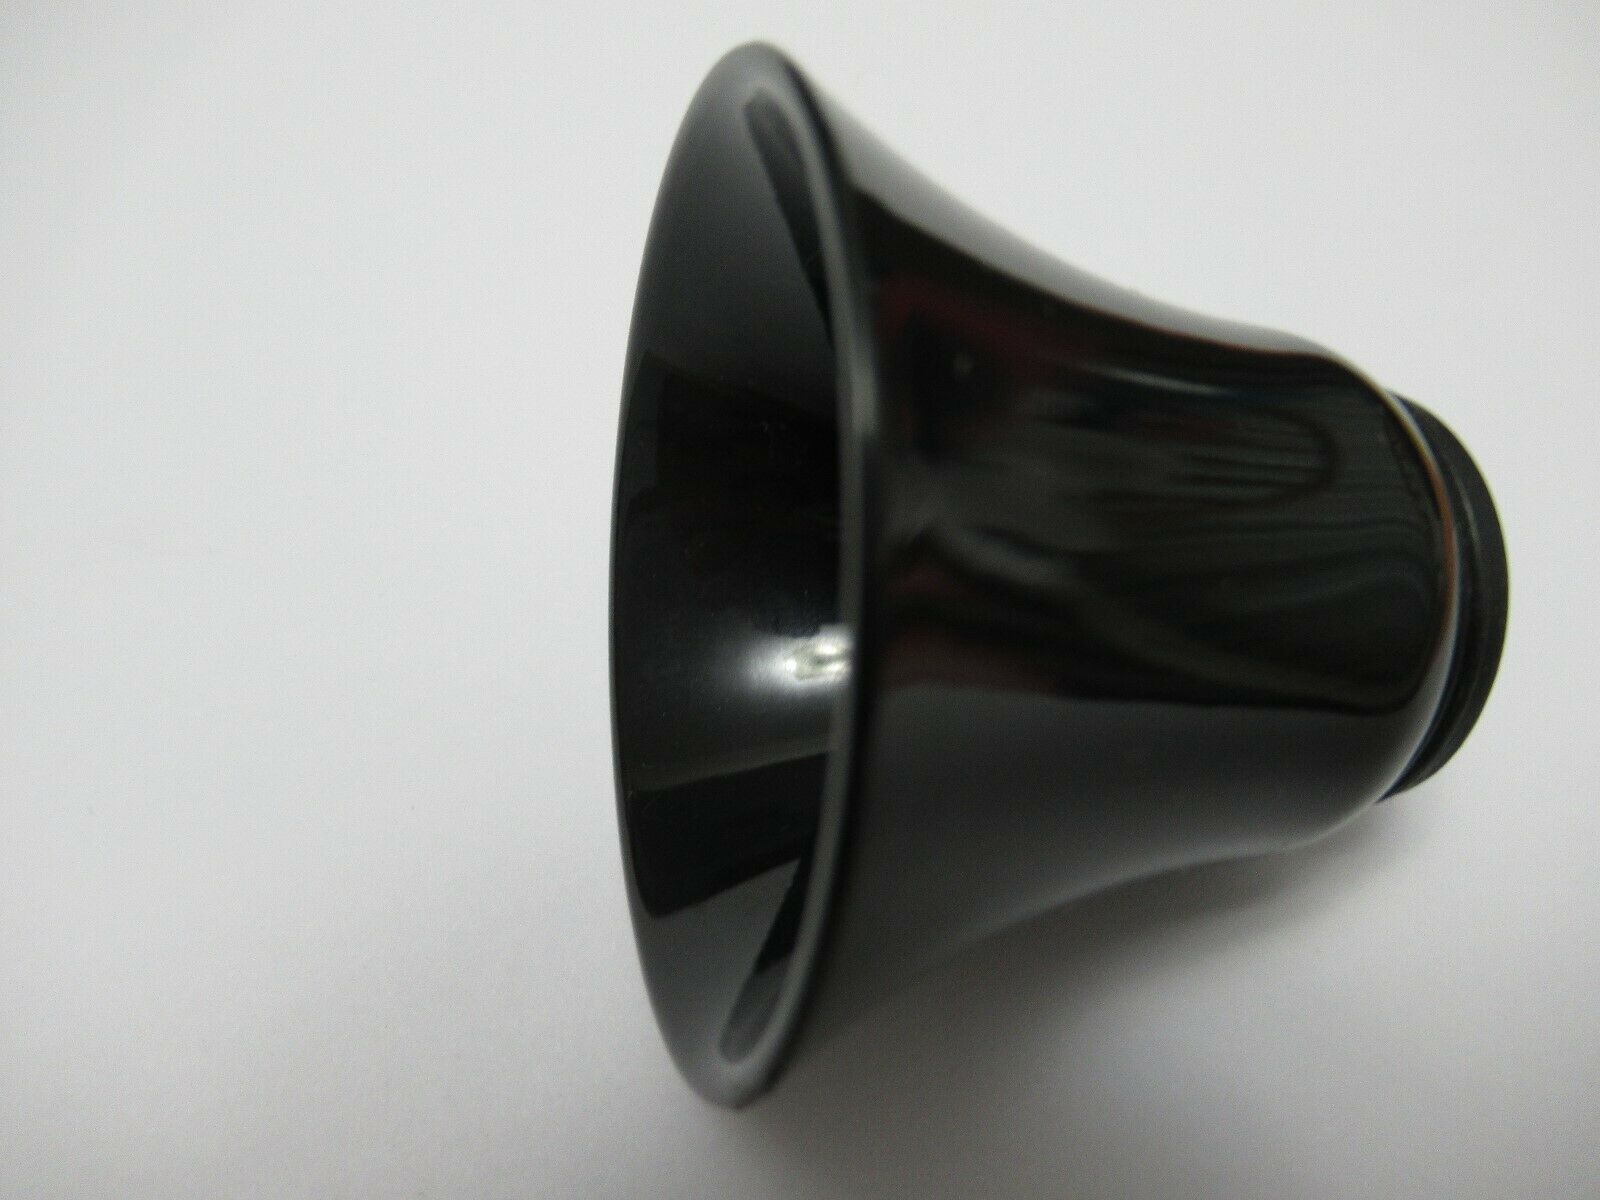 Western Electric Candlestick Telephone Wood Wall Telephone Mouthpiece